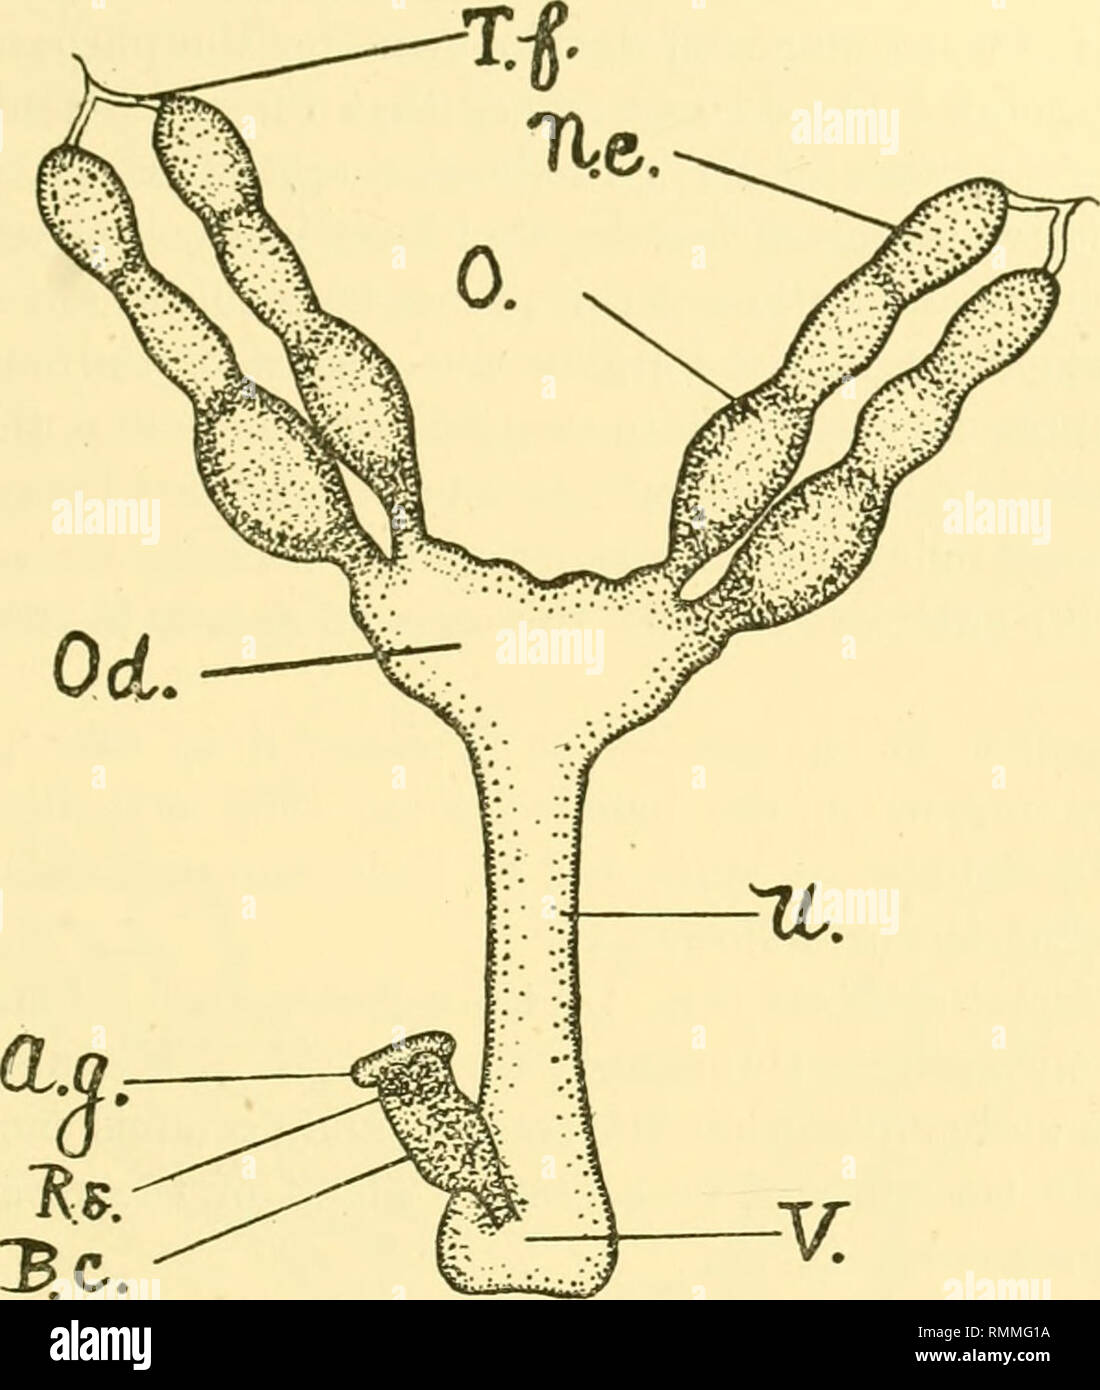 . Annals of applied biology. Biology, Economic; Biochemistry. ^y. iiiTCHiE 191 FEMALE REPRODUCTIVE ORGANS OF C. ABIETIS. Fig. 13 depicts the reproductive organs of a female about to proceed to egg-laying.. Fig. 13. Reproductive organs of female C. abietis about to lay eggs (greatly magnified). There are two ovaries, one on each side of the abdomen. Each ovary (0.) consists of two egg-tubes, which open into the paired oviduct. At the anterior extremities of each egg-tube there is a terminal nutritive chamber (iV.c.) and at its apex a terminal filament {T.f.). The eggs pass from the egg-tubes to Stock Photo